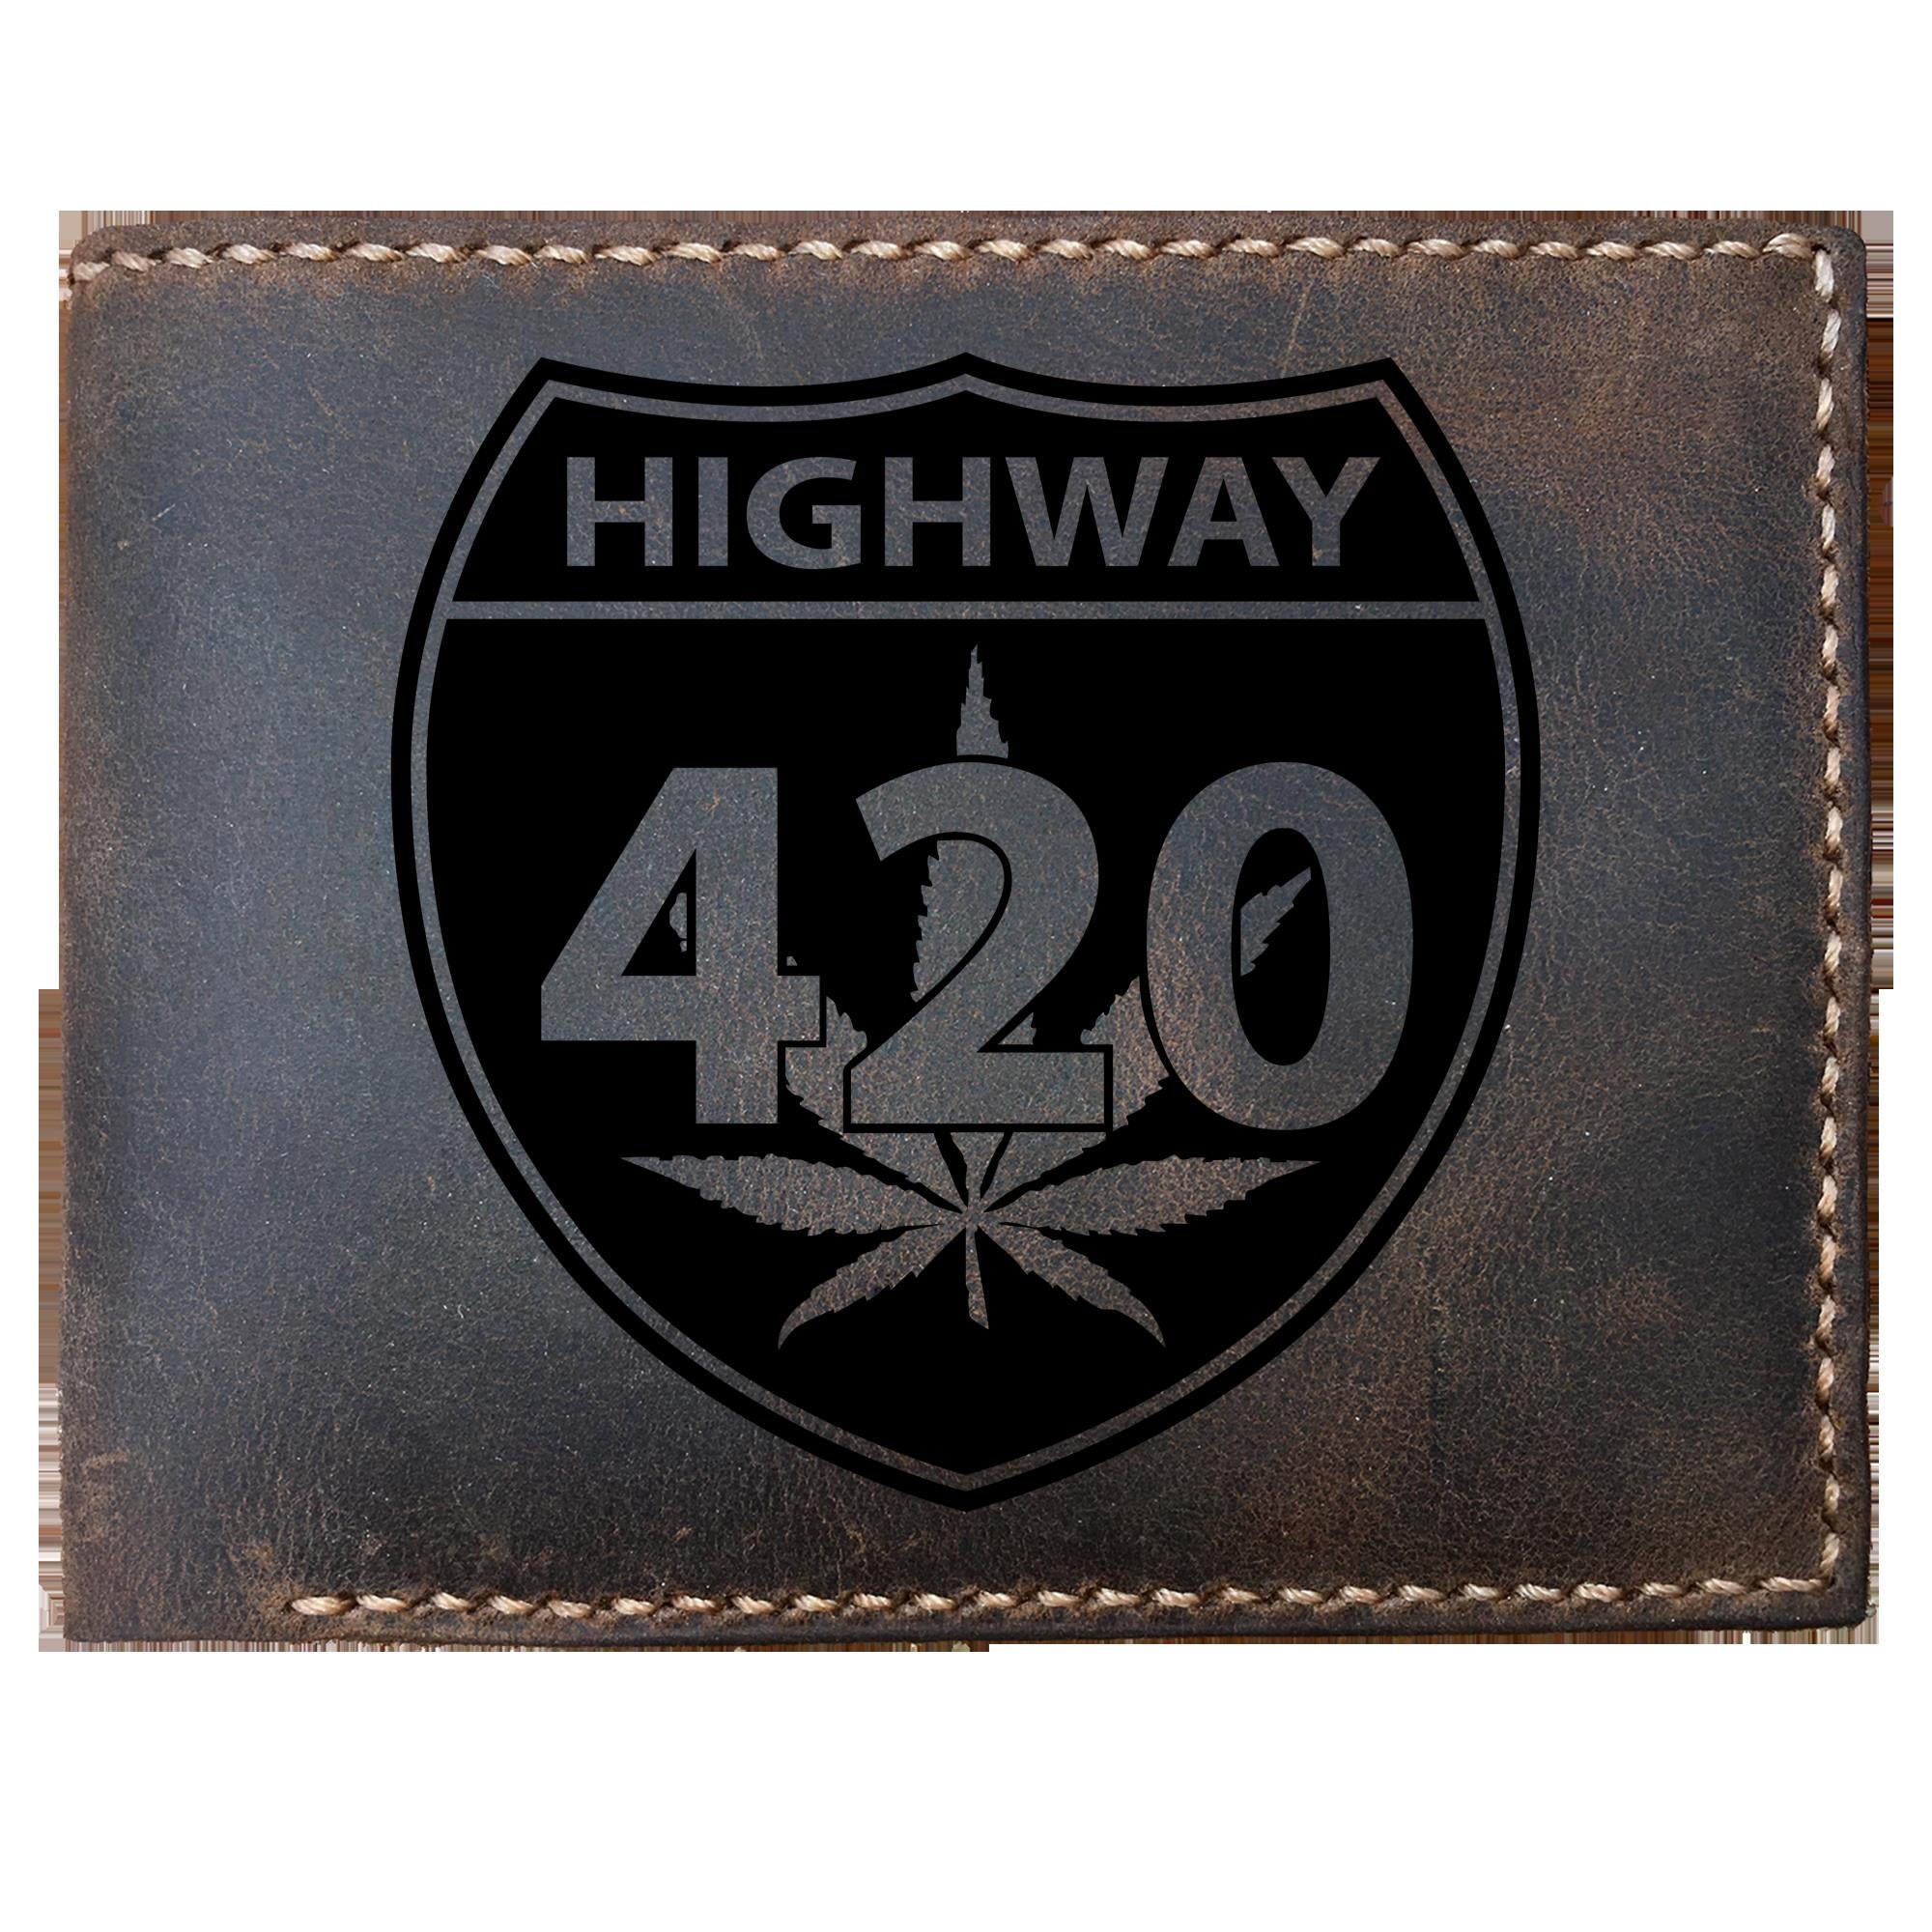 Skitongifts Funny Custom Laser Engraved Bifold Leather Wallet For Men, Highway 420, Pot, Grass, Weed